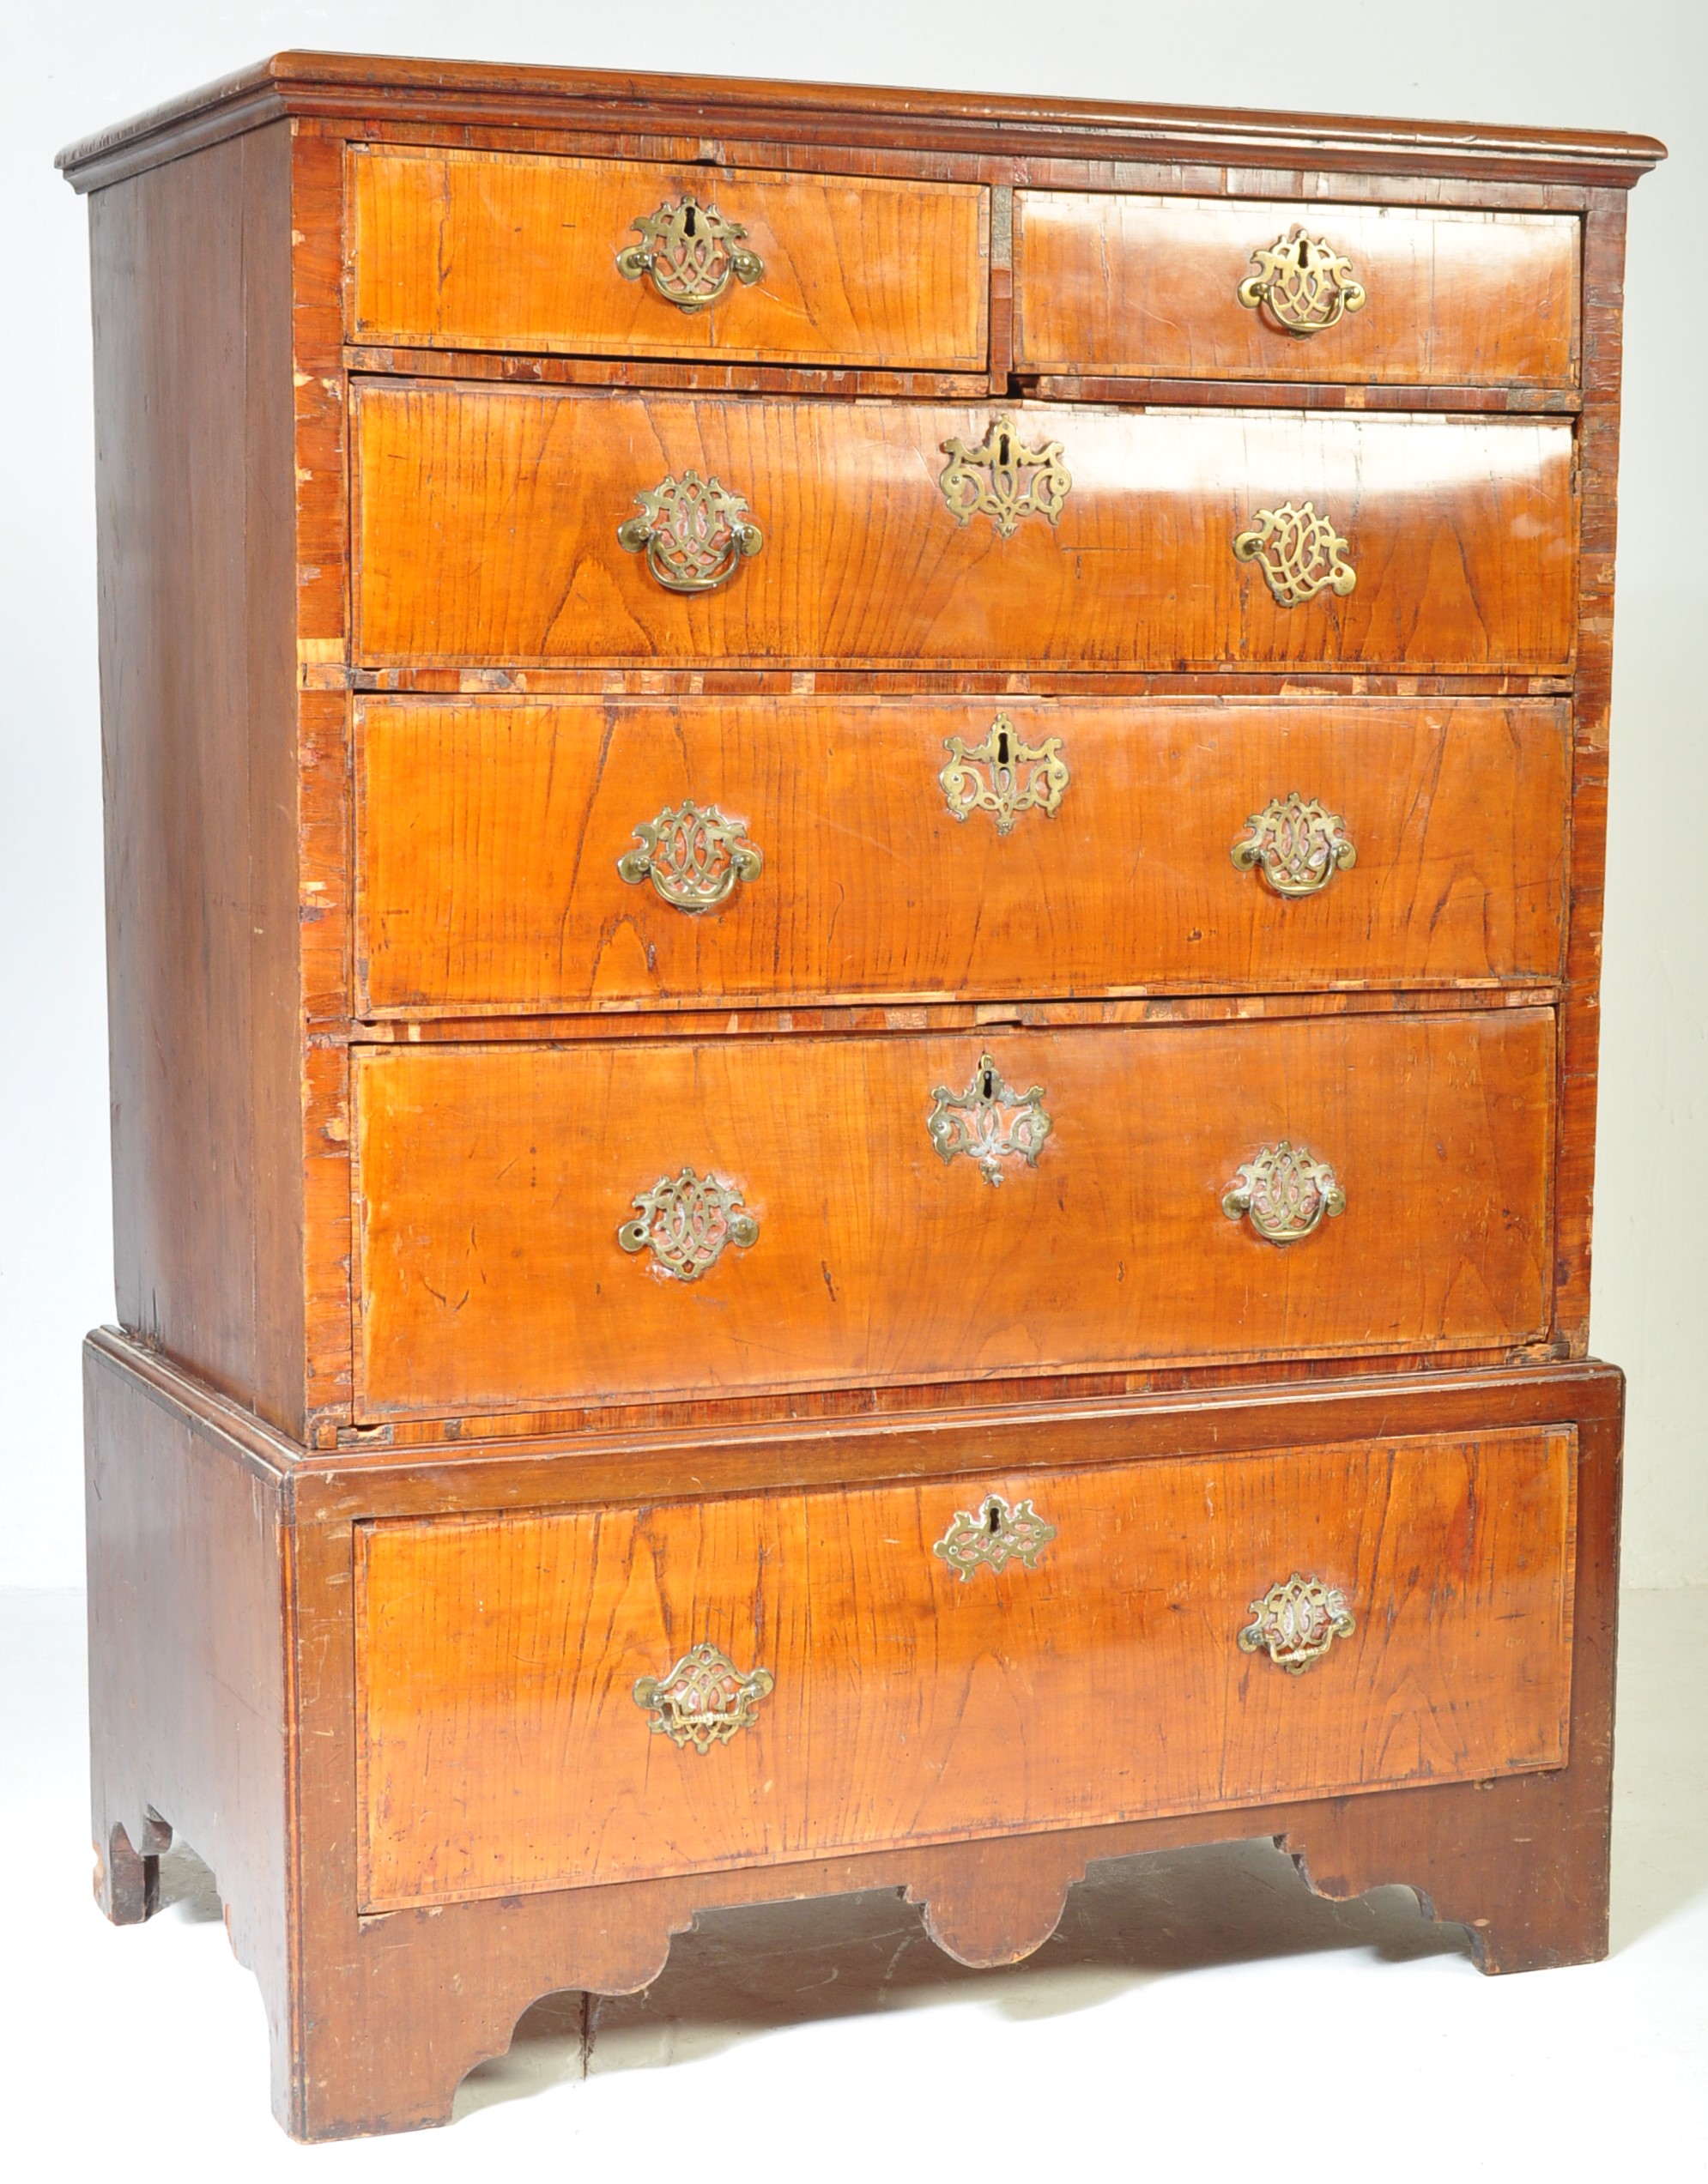 EARLY 18TH CENTURY QUEEN ANNE WALNUT CHEST OF DRAWERS